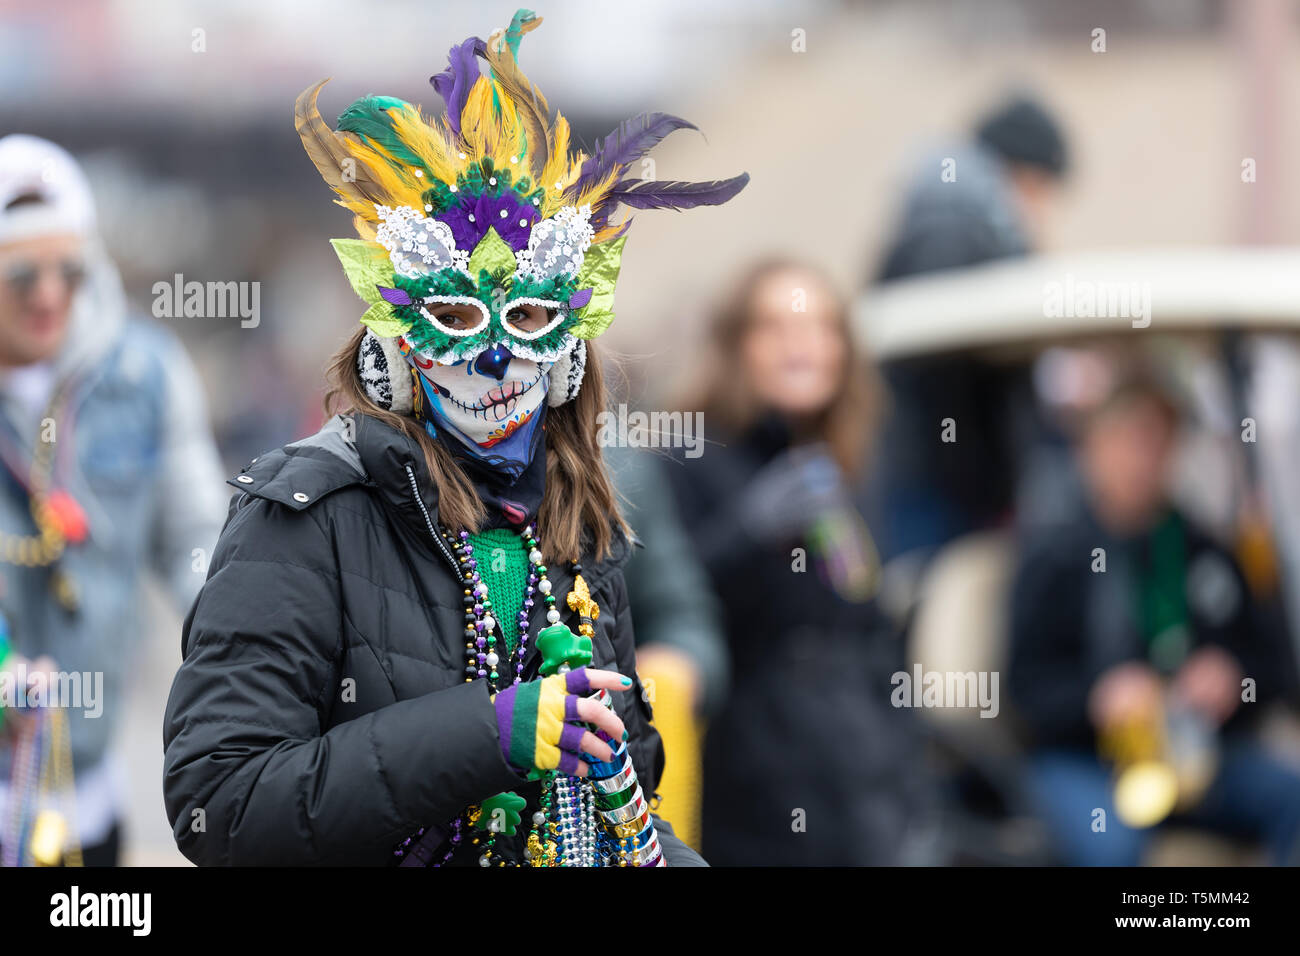 St. Louis, Missouri, USA - March 2, 2019: Bud Light Grand Parade, Man  drinking and wearing a St Louis Cardinals shirt, posses for the camera  during th Stock Photo - Alamy